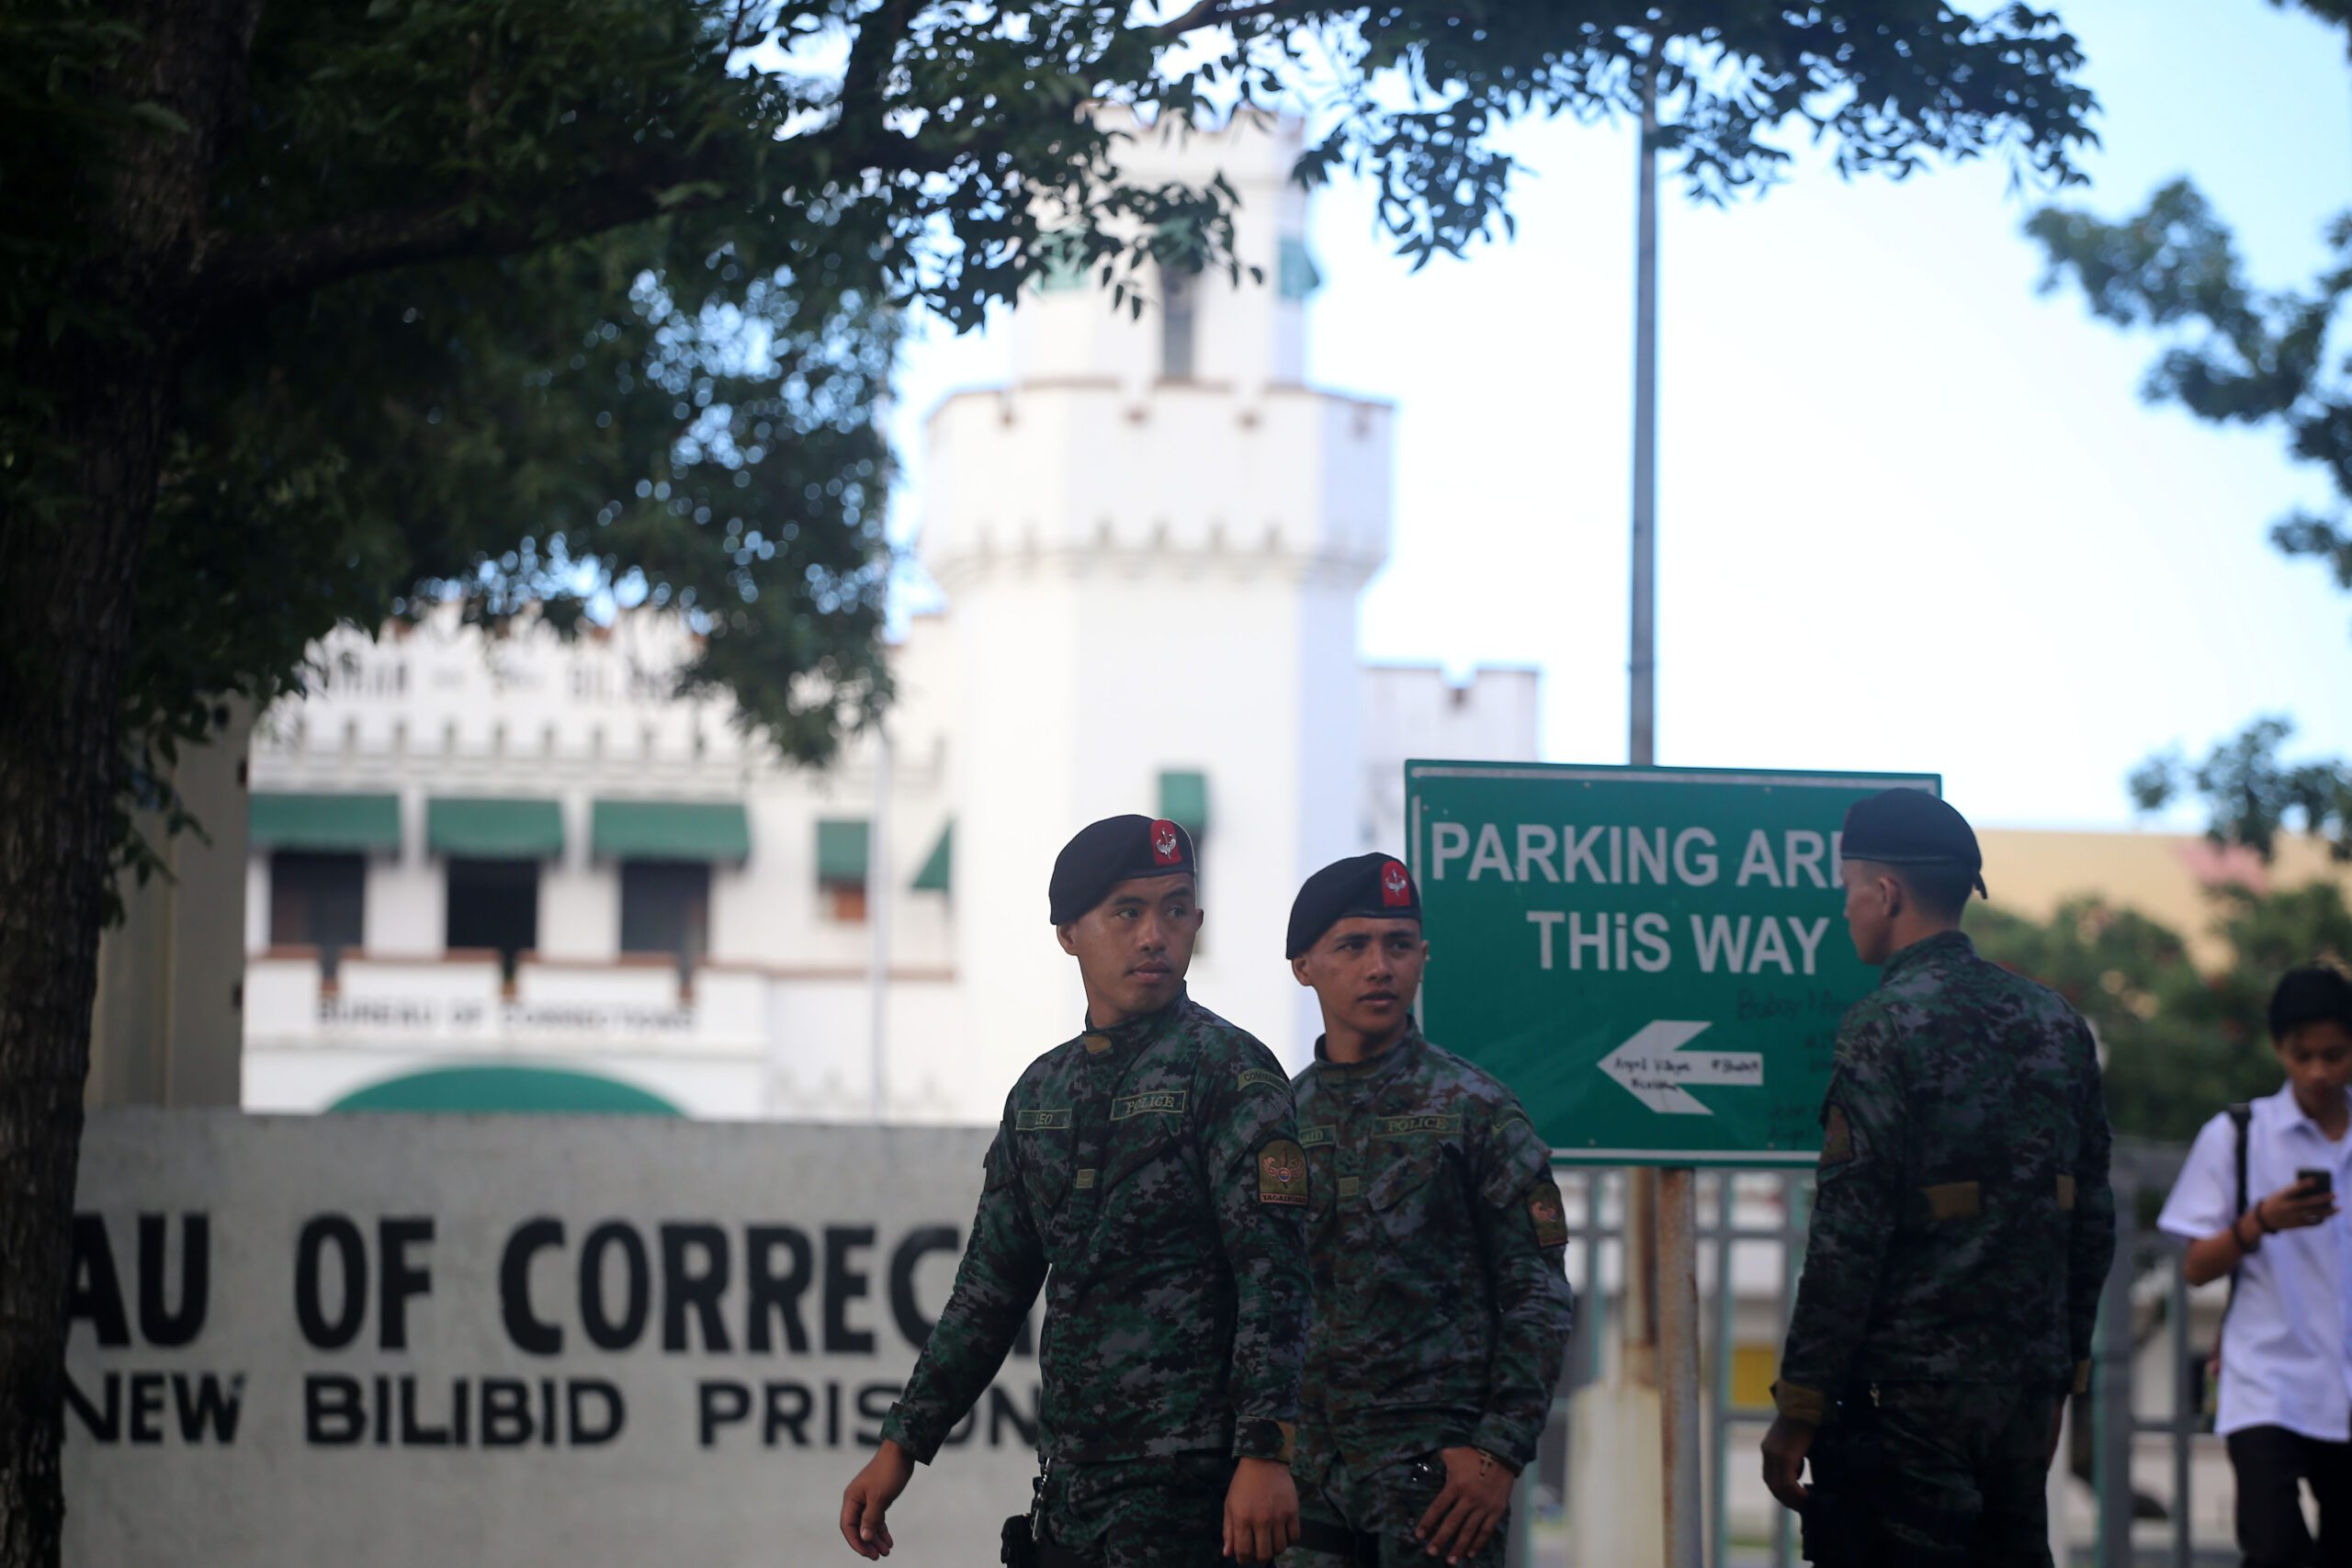 The high life: Illegal drugs and the New Bilibid Prison